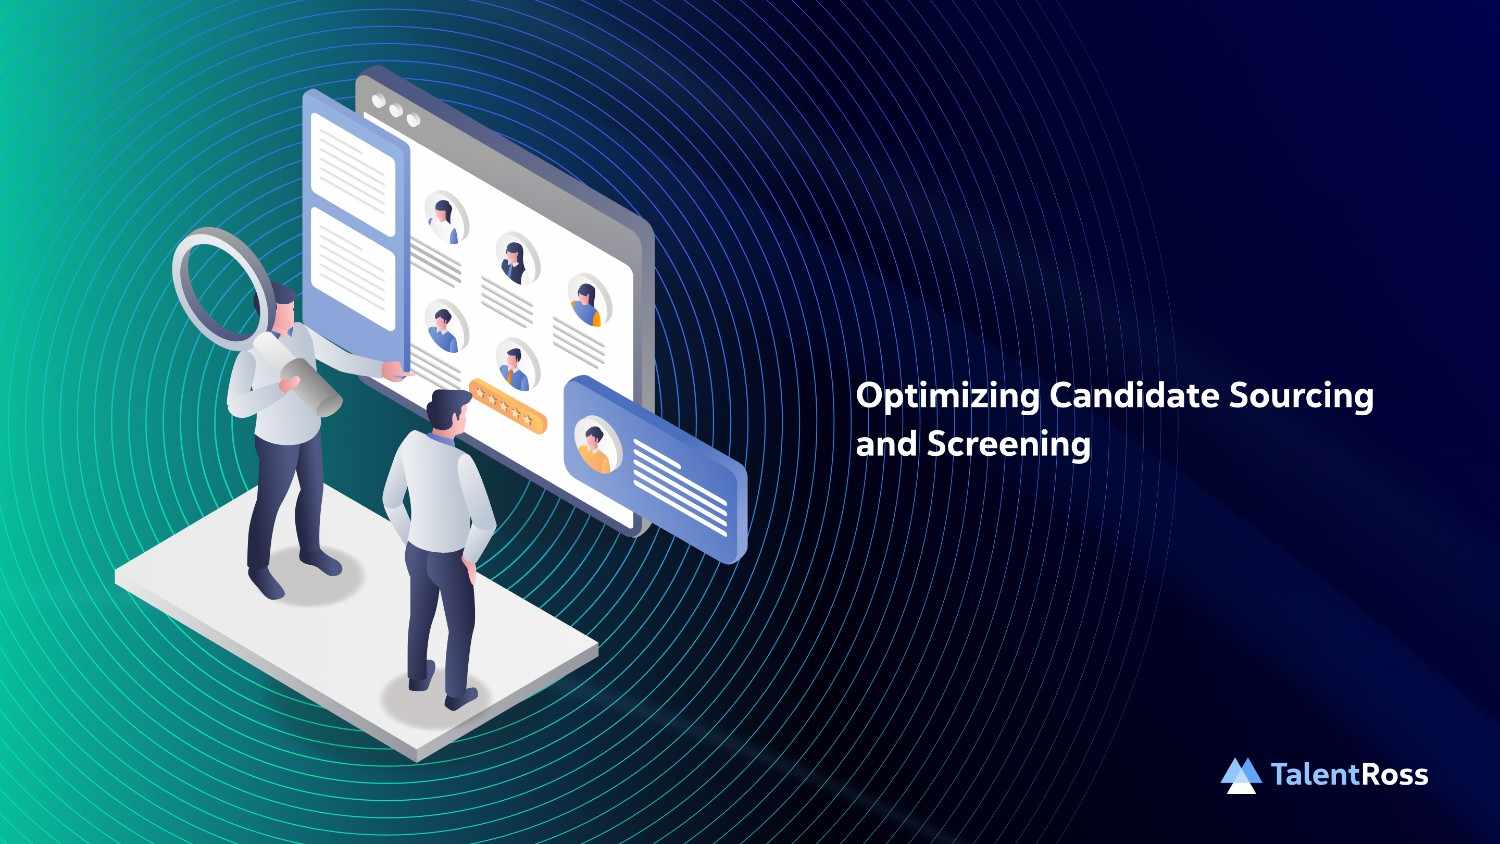 Optimizing Candidate Sourcing and Screening